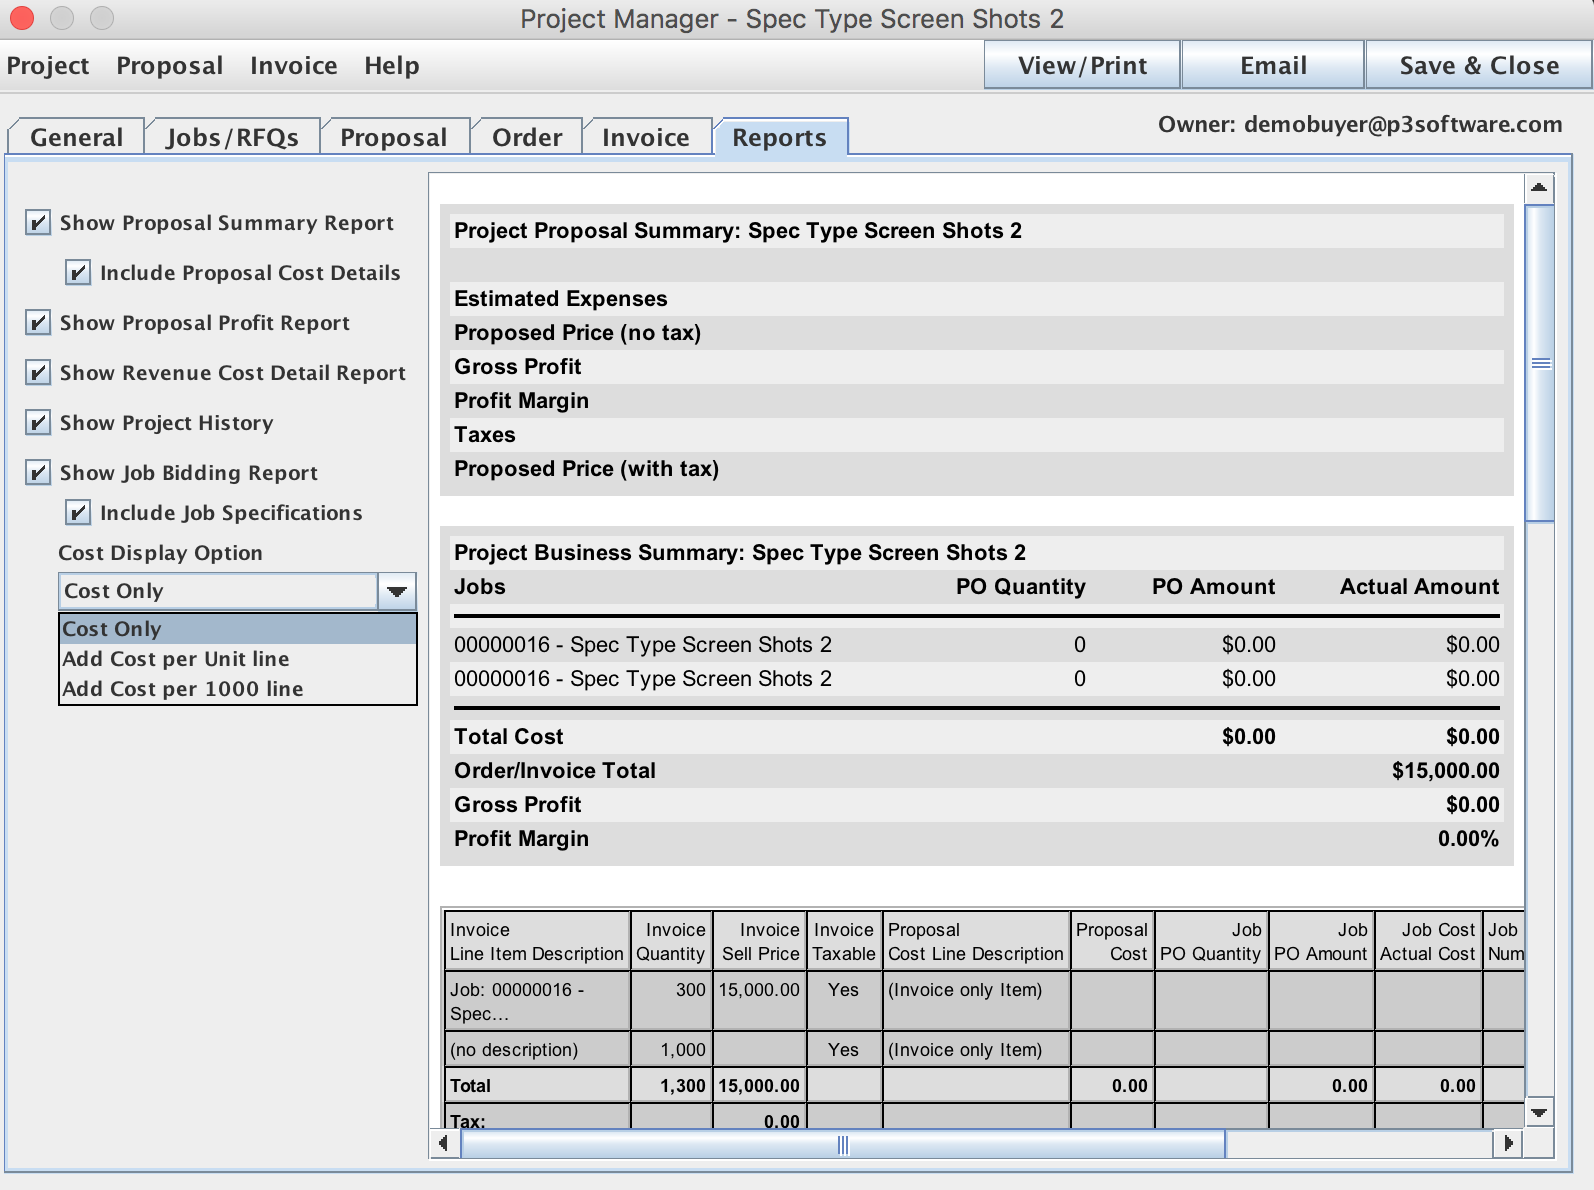 The Project Manager, showing the Summary tab pane